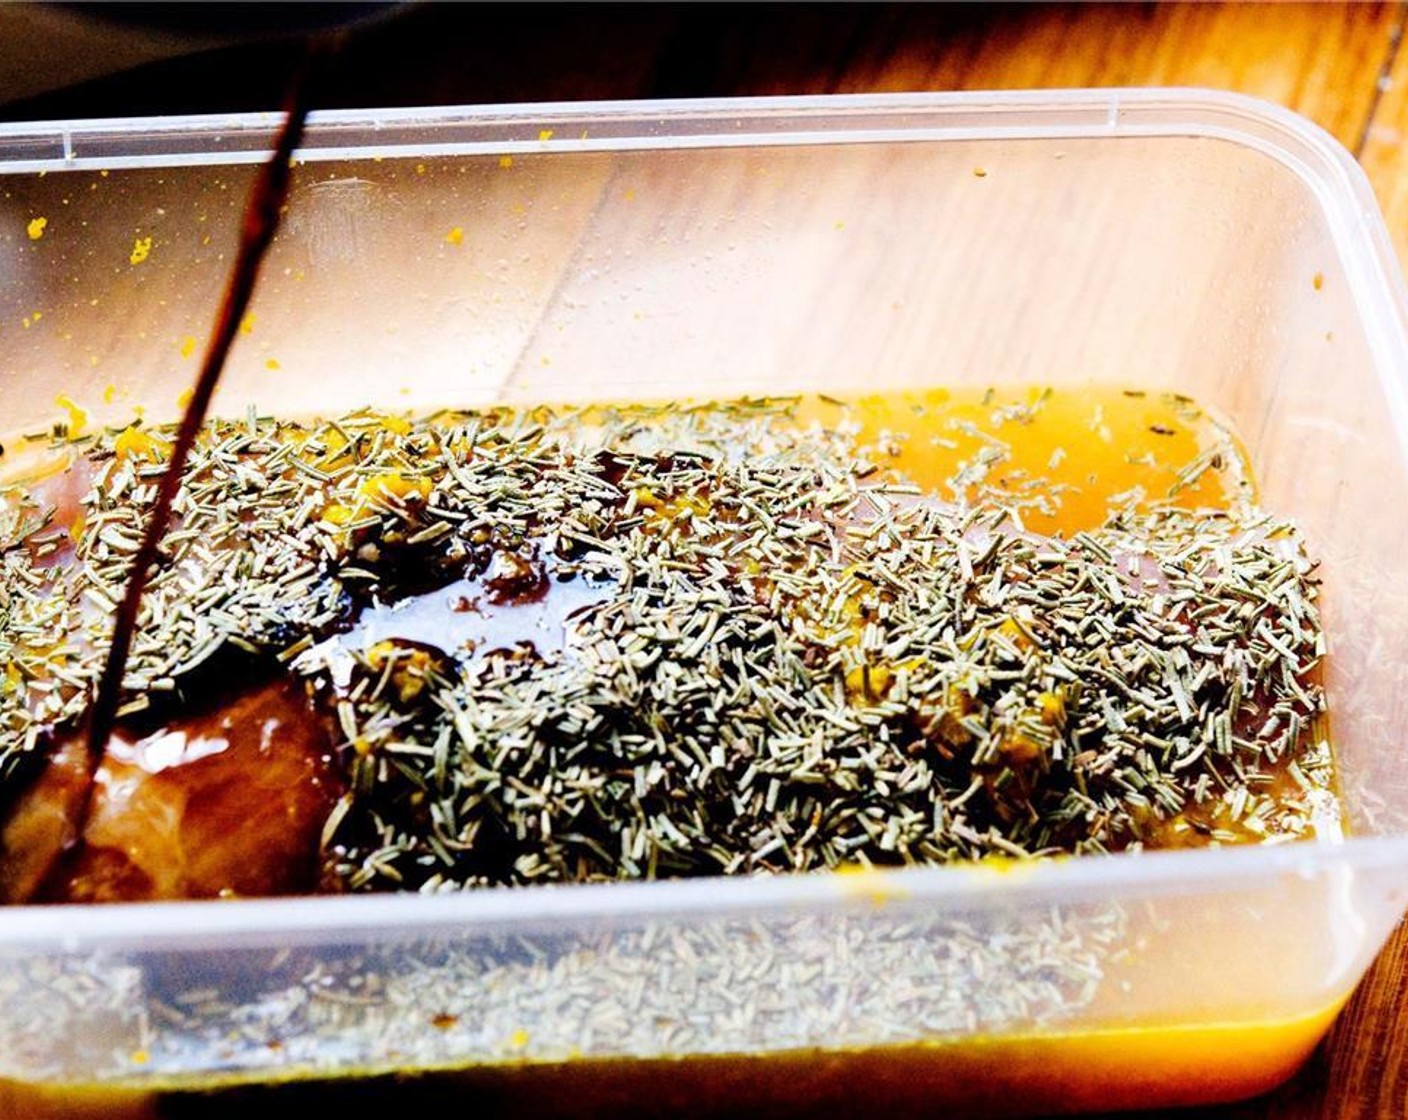 step 4 Season with Fresh Sage (1 tsp), Italian Seasoning (1 tsp), and Seasoned Salt (1 tsp). Then add the Marsala Wine (1 cup). Cover and let it marinate for at least 24 hours inside your fridge.